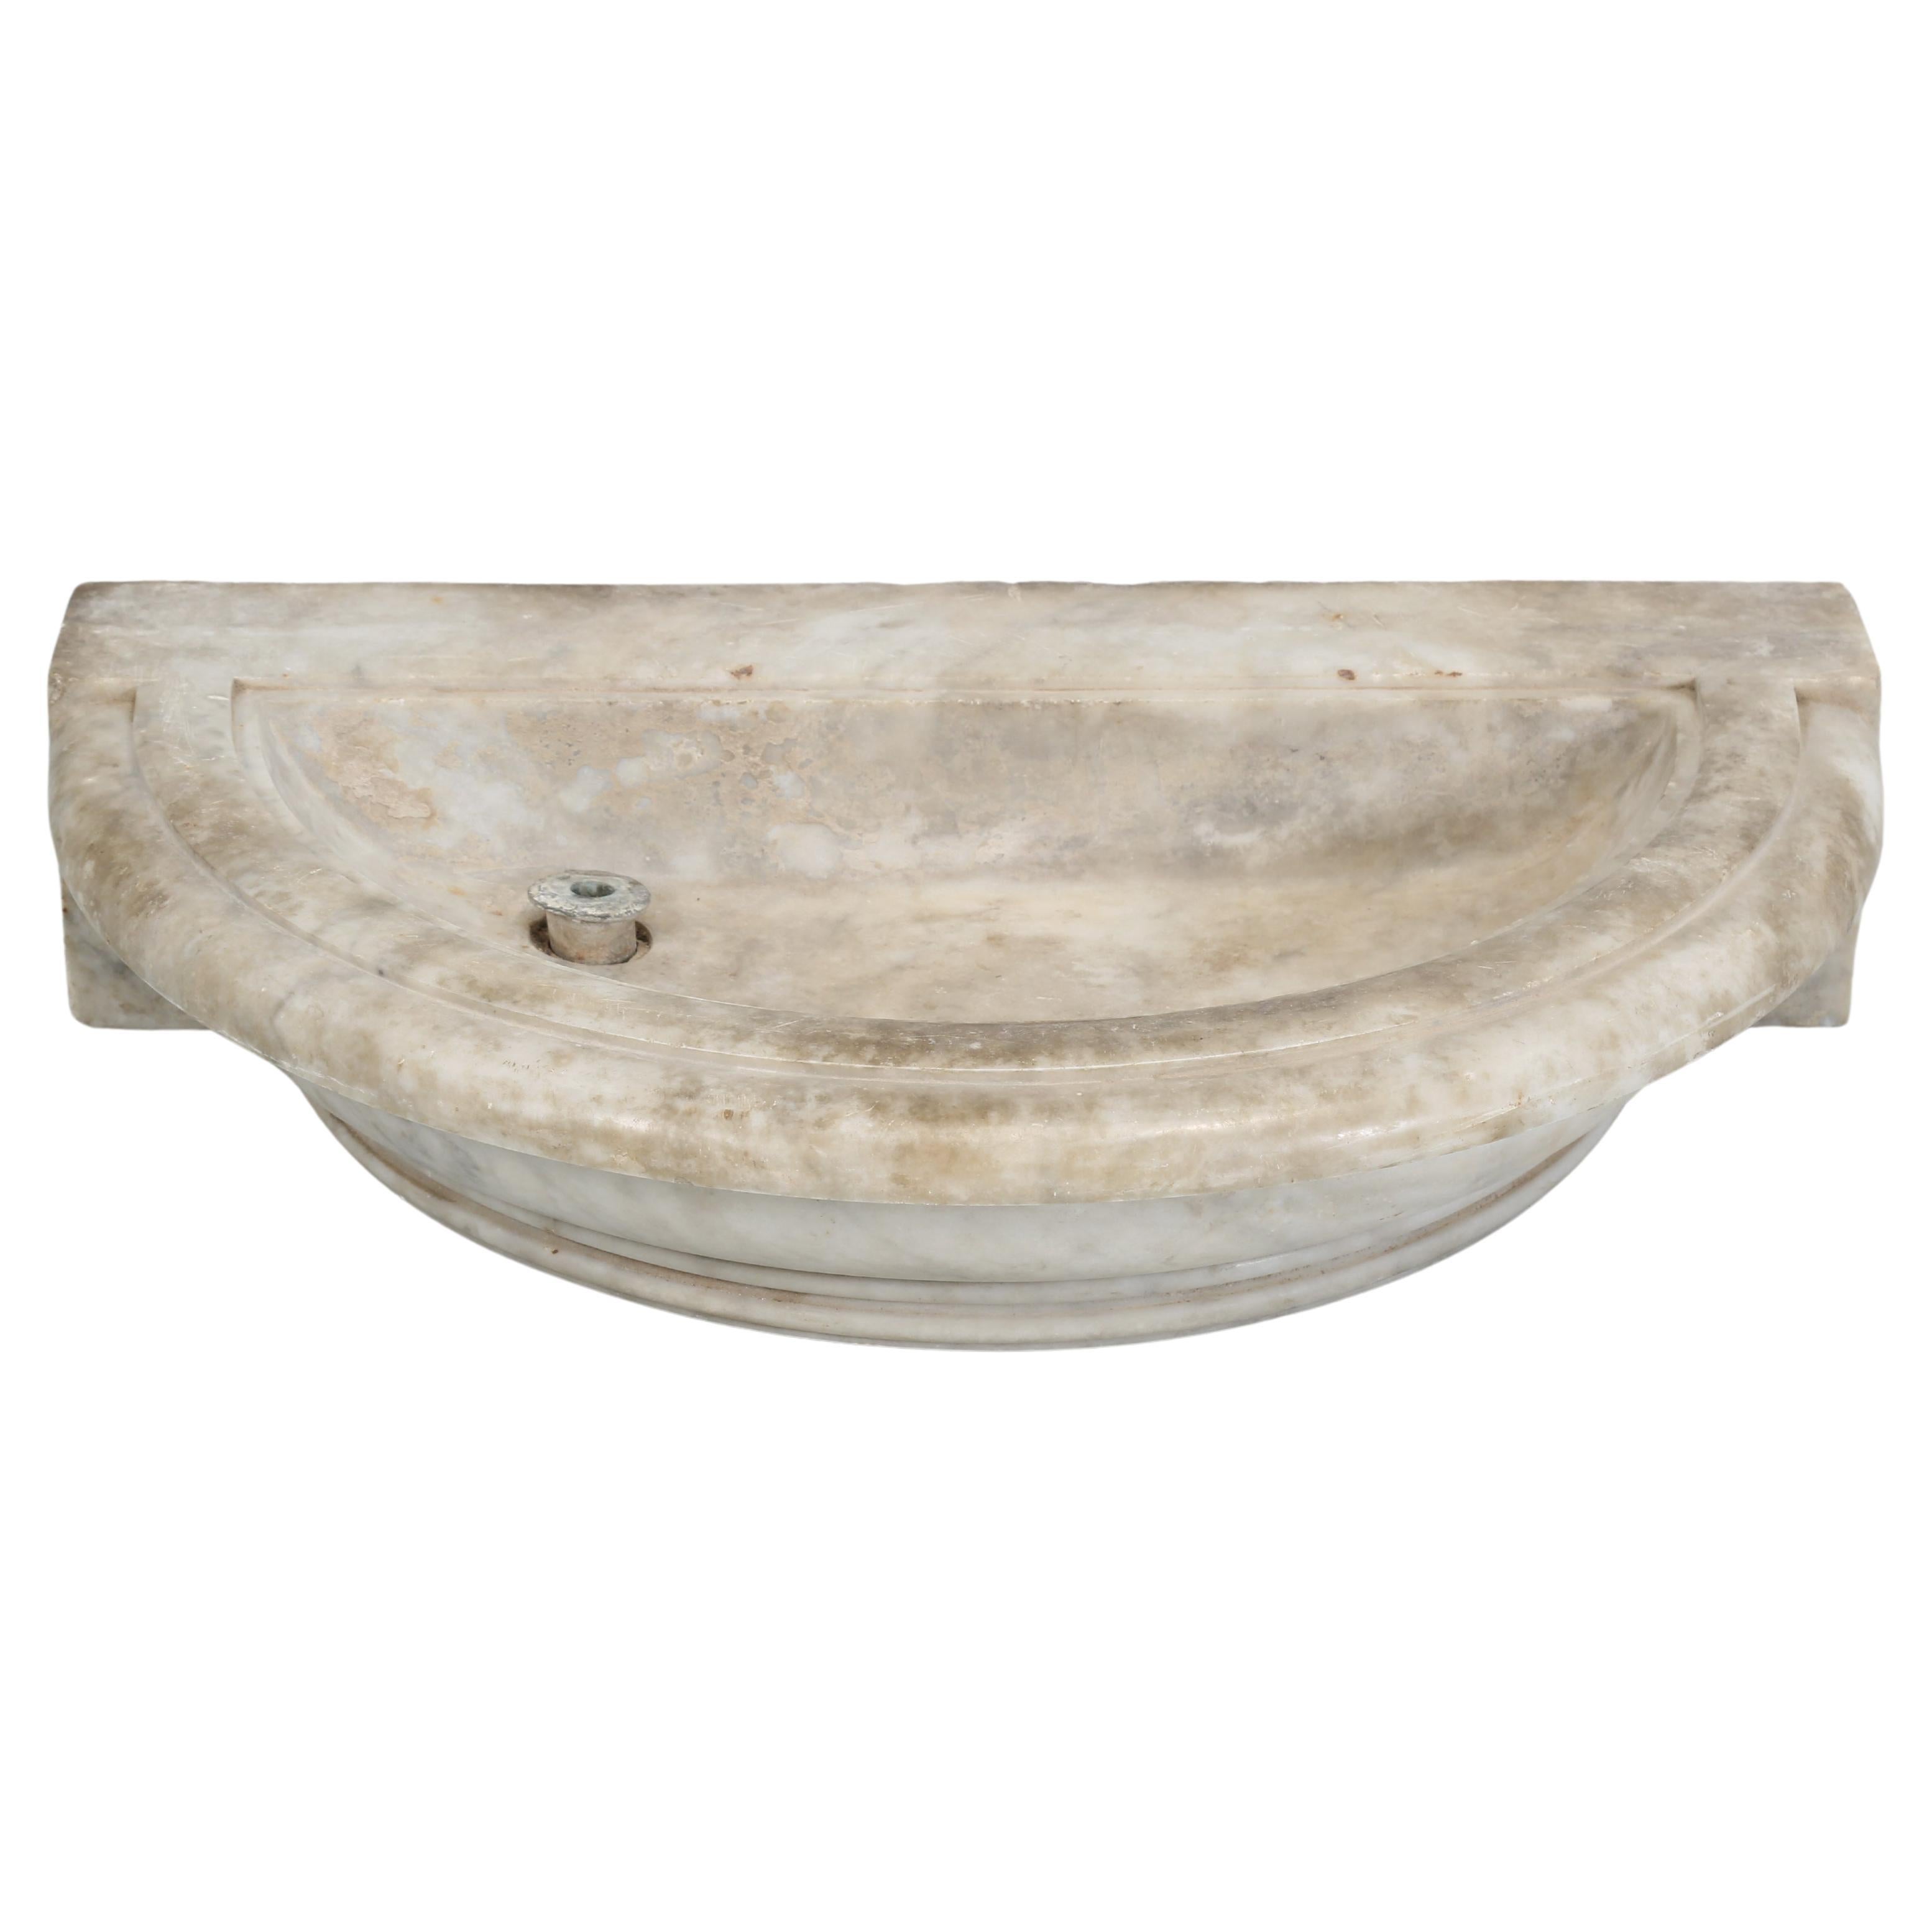 Antique Marble Sink from the Toulouse Region Perfect of Powder Room Bathroom